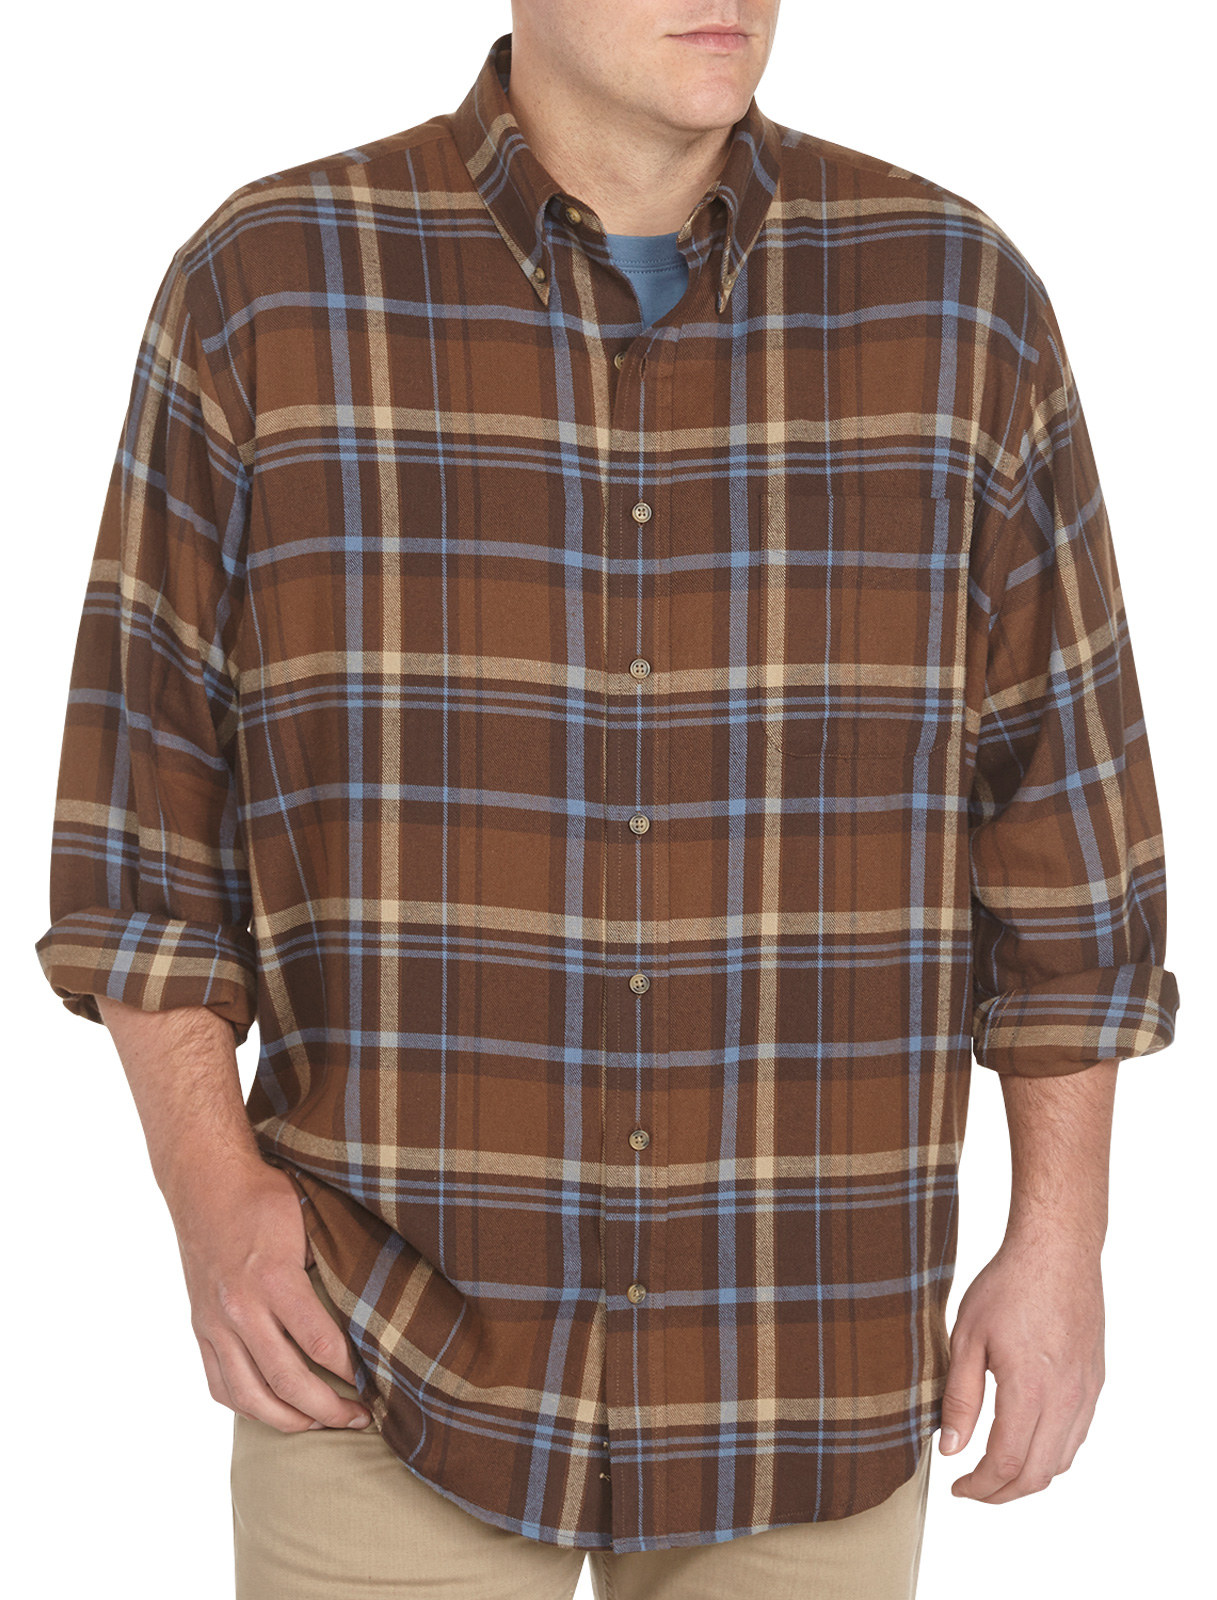 Harbor Bay Men's Big and Tall Plaid Flannel Shirt